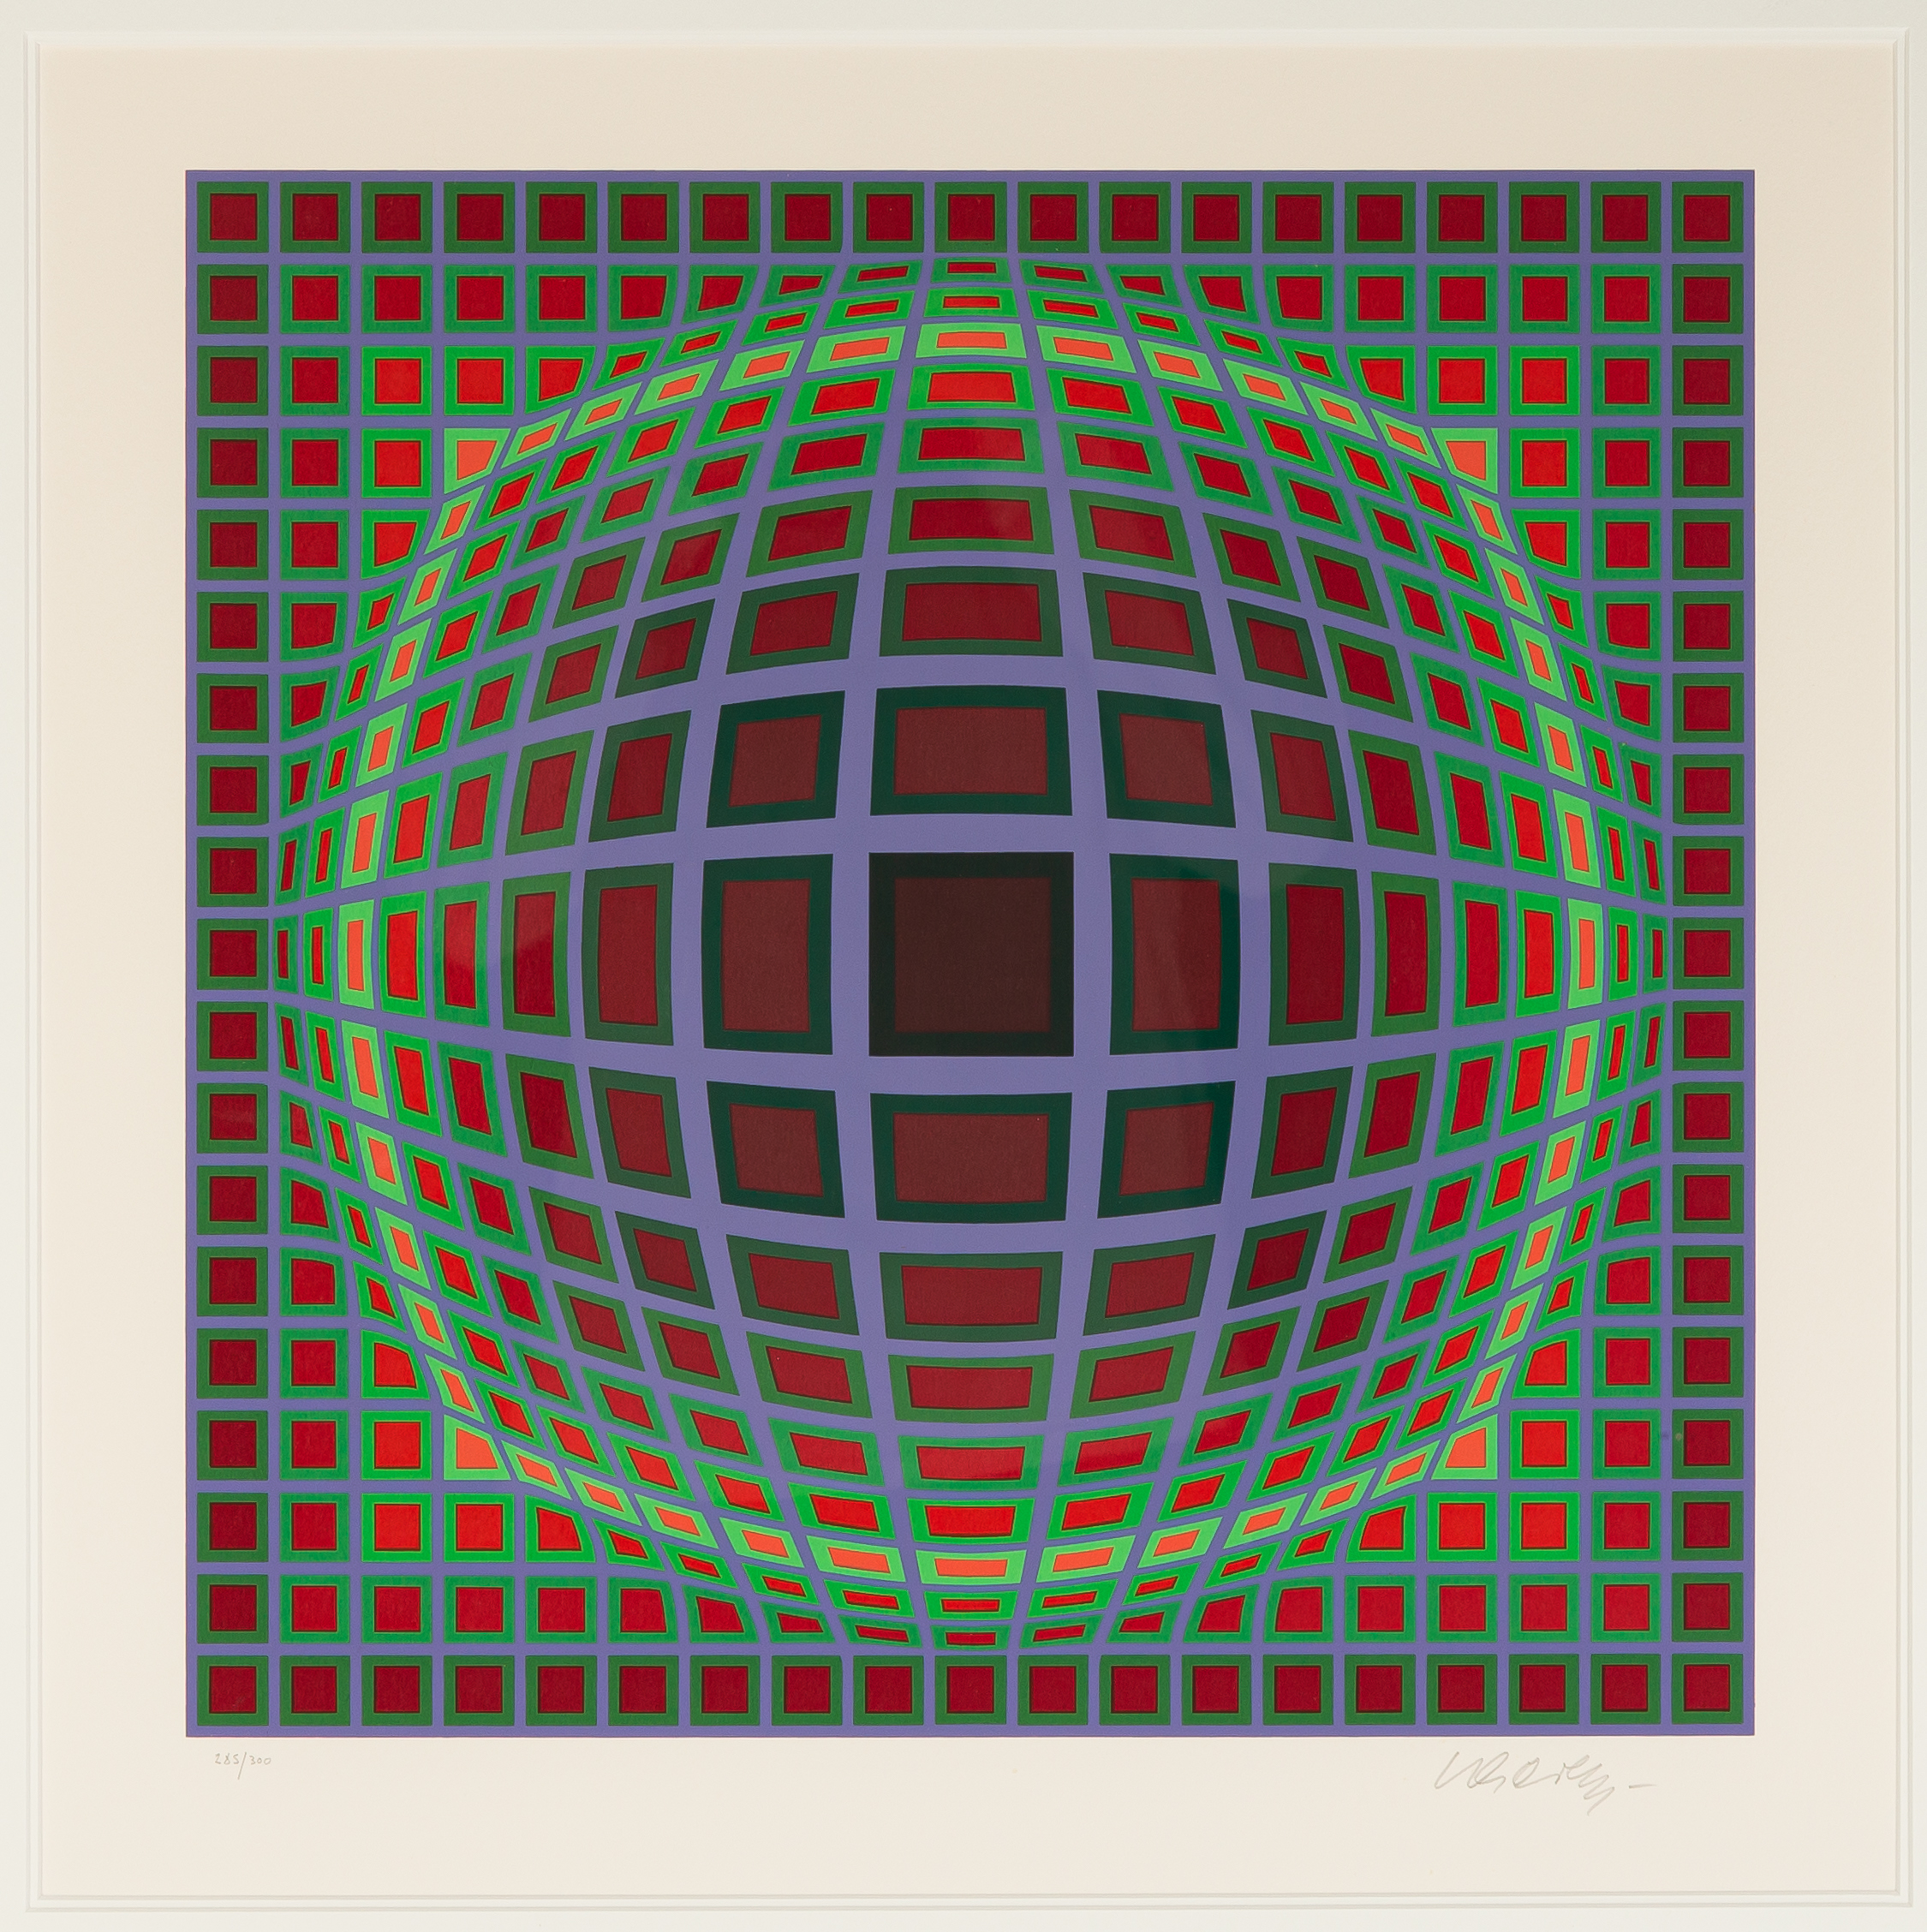 VICTOR VASARELY (FRENCH/HUNGARIAN, 1906-1997)